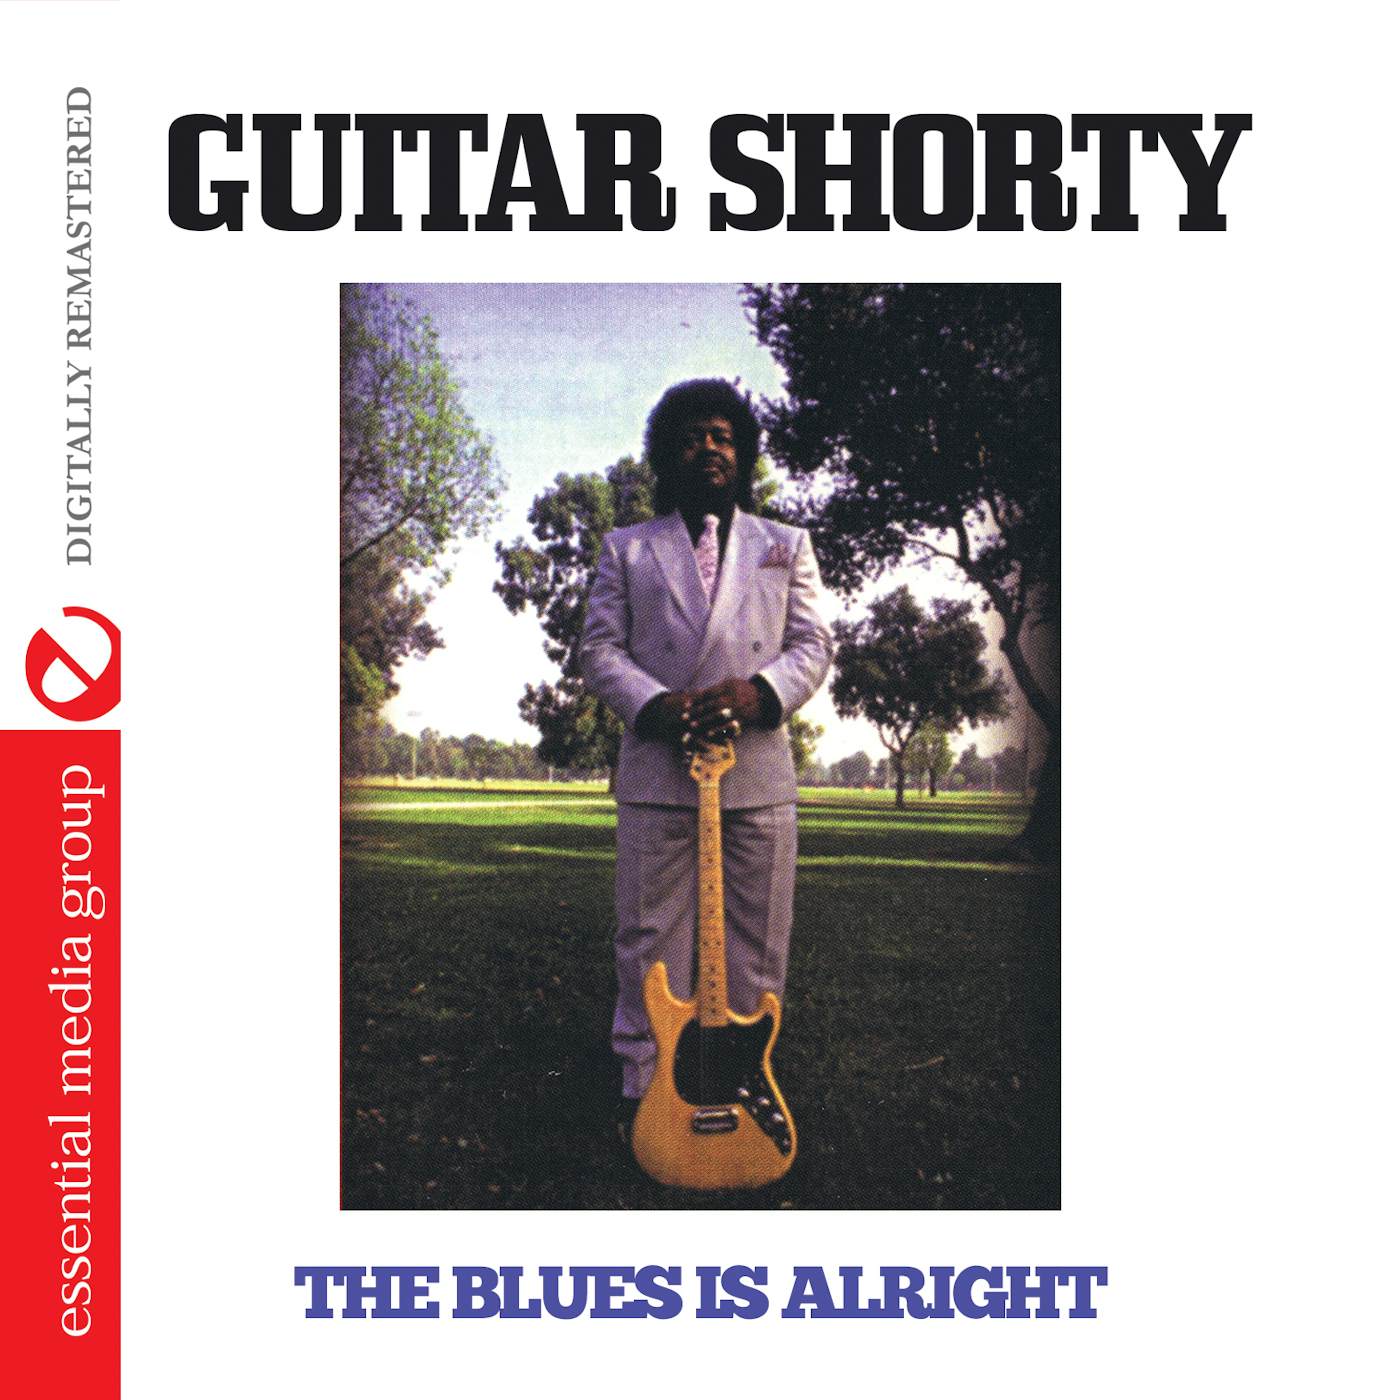 Guitar Shorty BLUES IS ALRIGHT CD